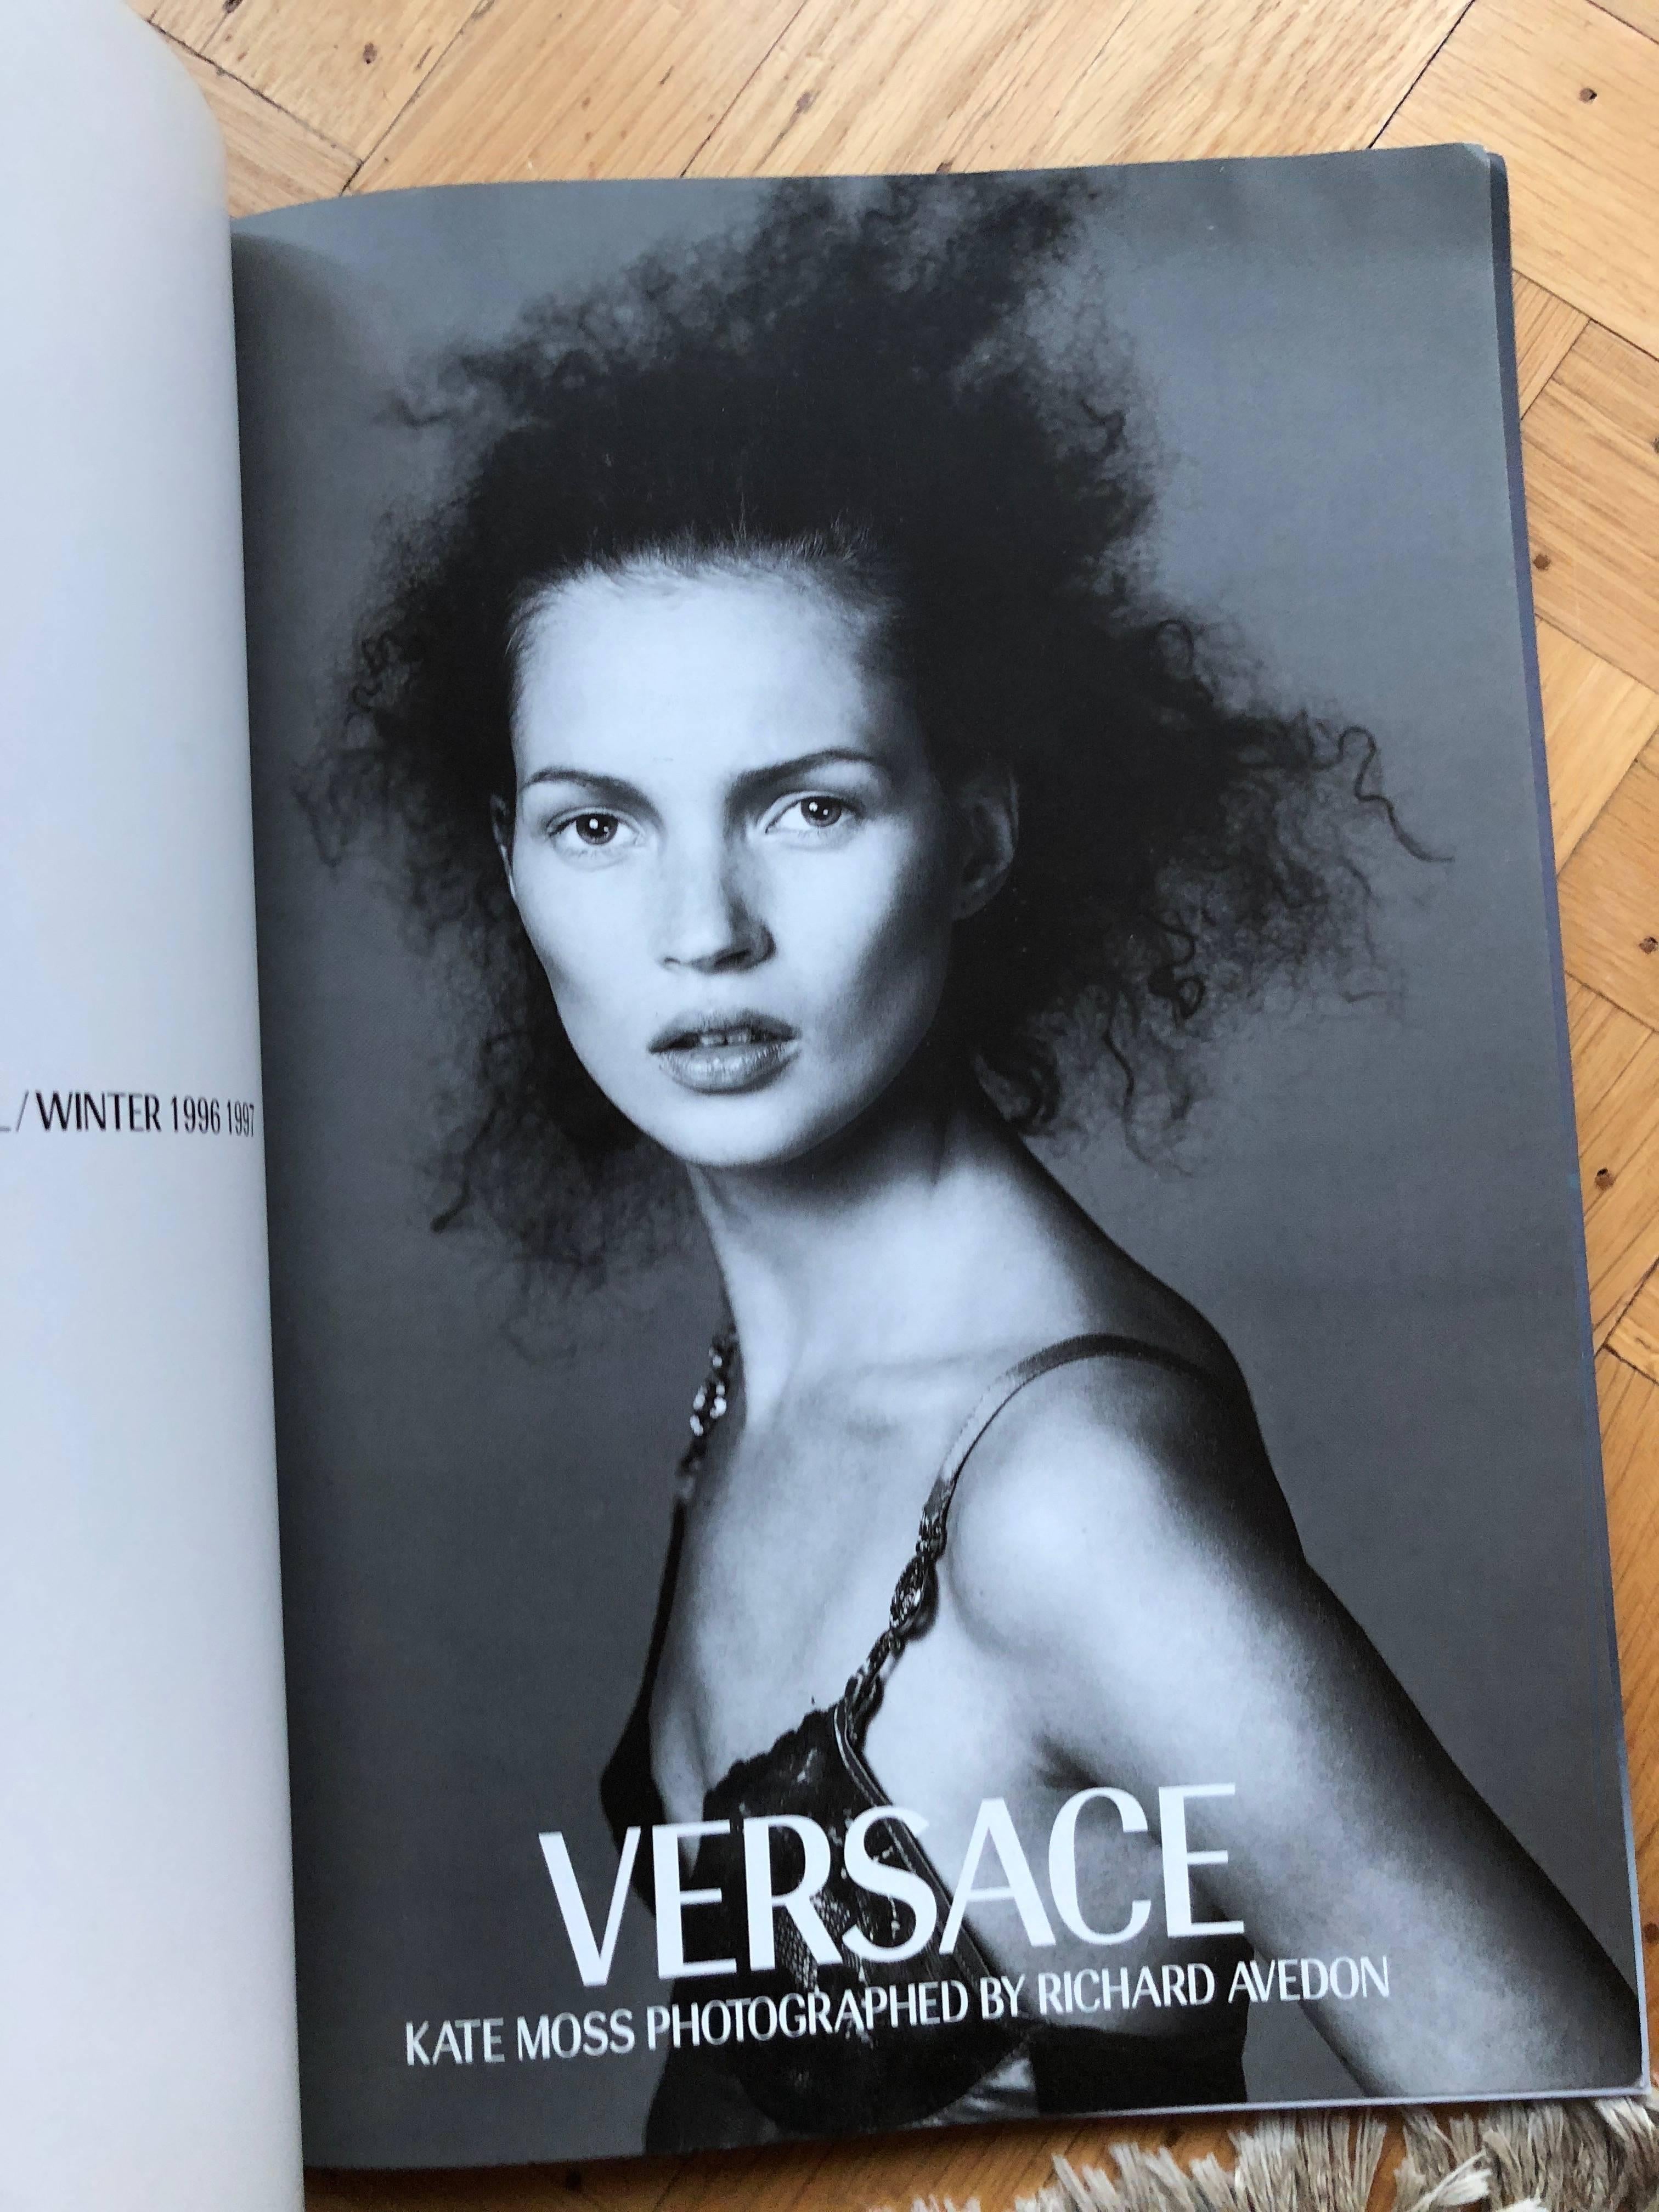 Versace Book No 31 Kate Moss by Richard Alvedon Autumn 1996-97
Gianni Versace documented every collection in the beginning of his career , hiring the best photographers and stylists.
This book is all Kate Moss photographed by Avedon.